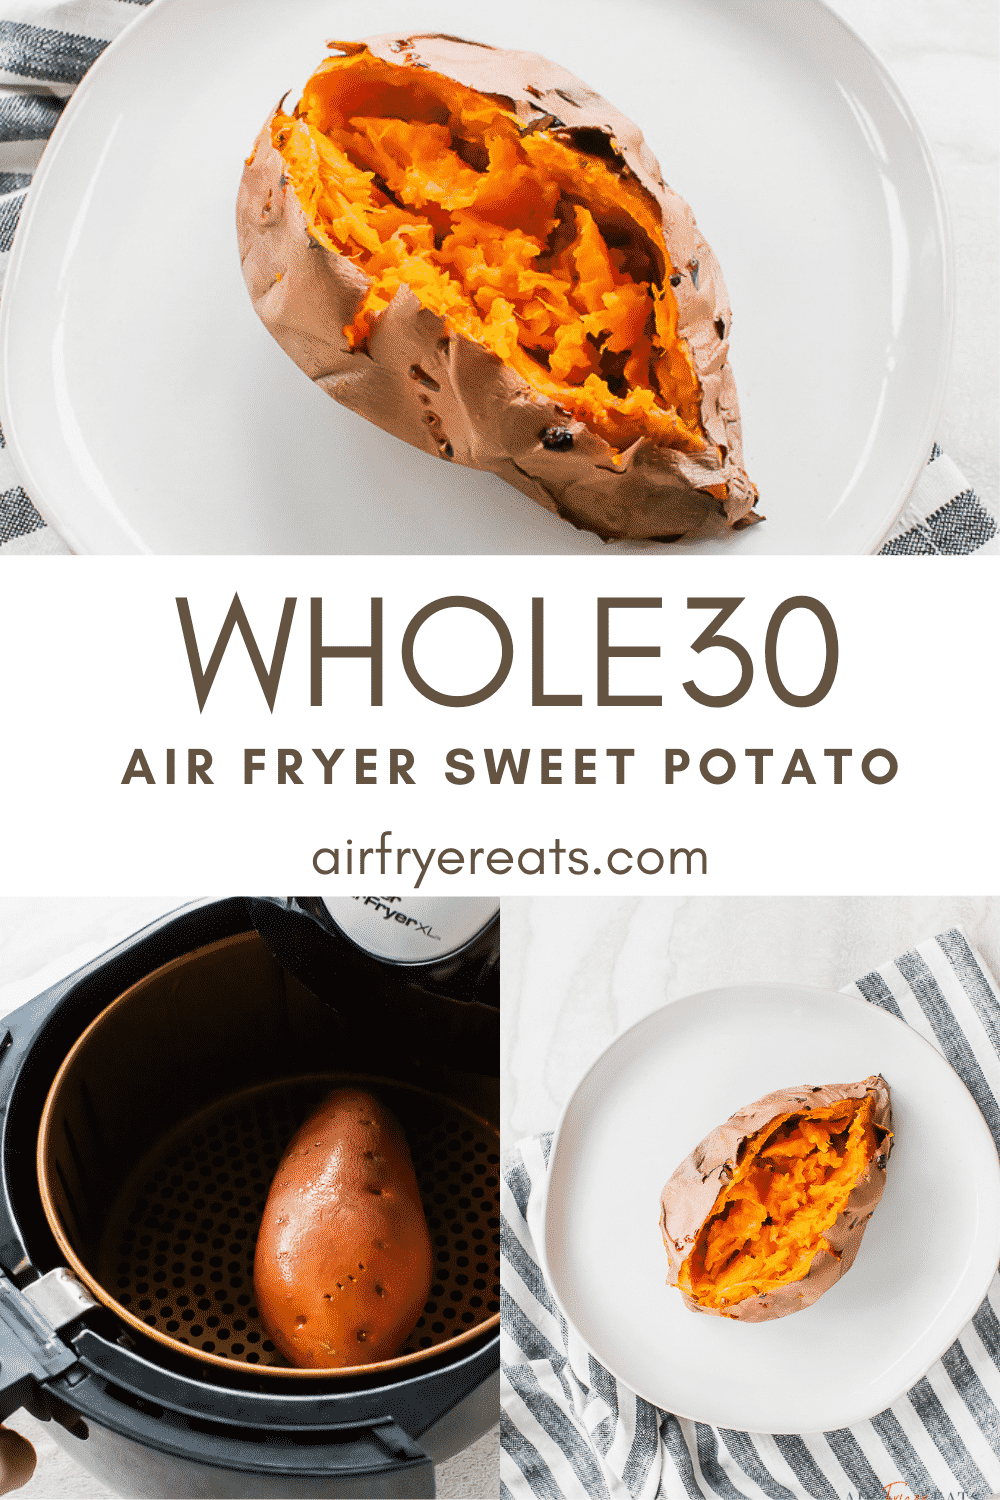 Cooking sweet potatoes doesn't have to be a daunting task when you have an air fryer in your kitchen! This Air Fryer Sweet Potato recipe results in fluffy, scrumptious sweet potatoes every single time! #sweetpotato #sweetpotatorecipes #airfryerrecipes via @vegetarianmamma